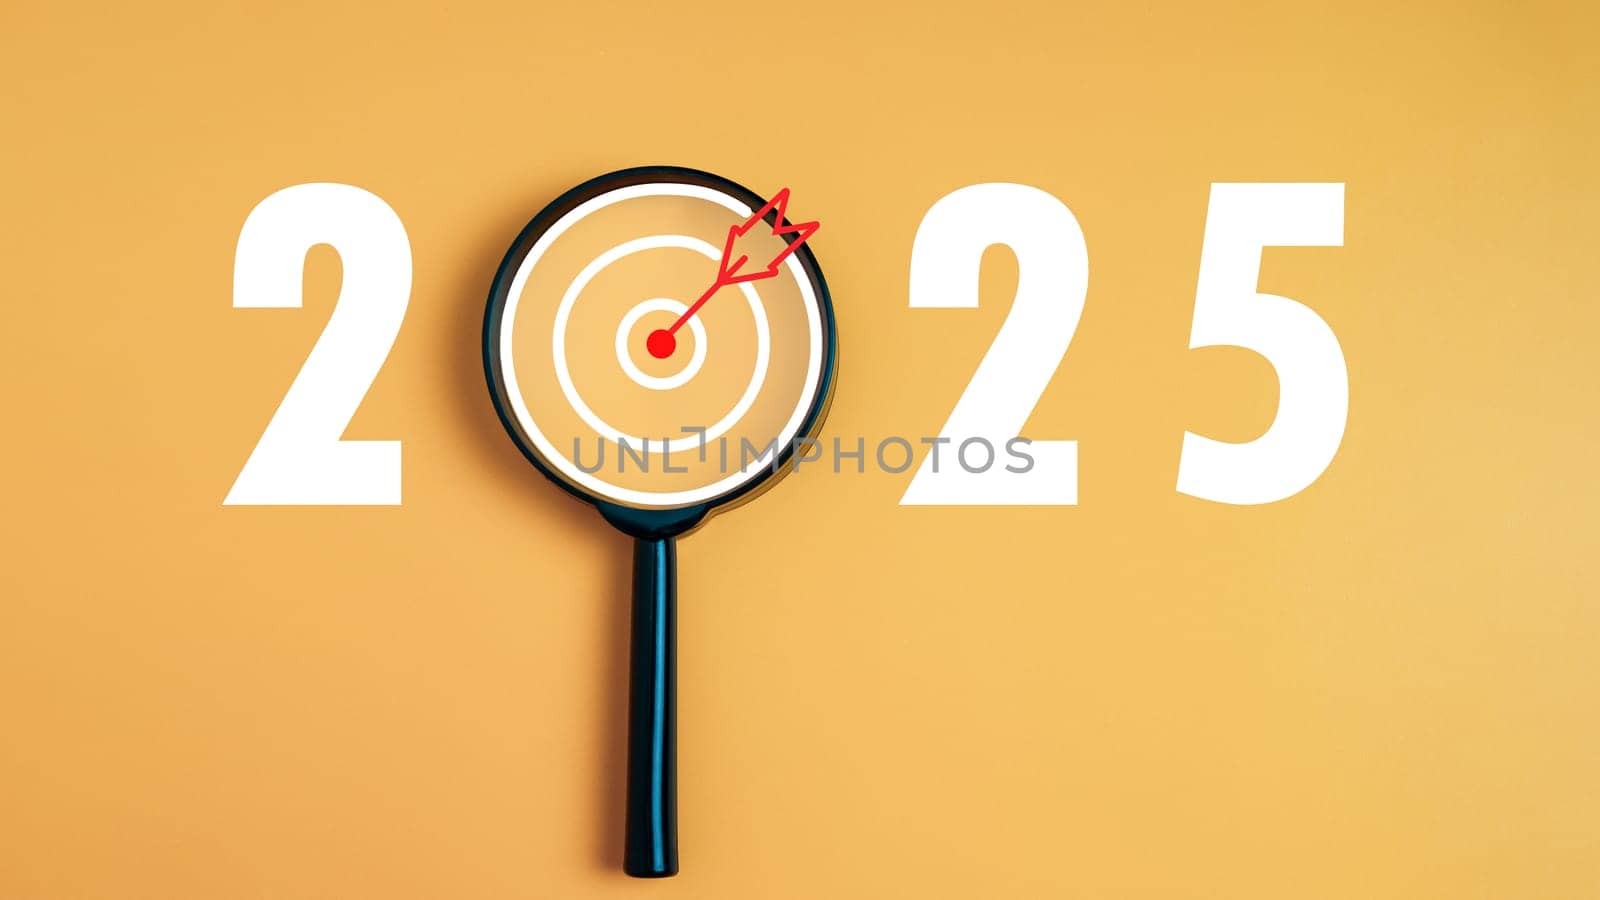 Dartboard icon in a magnifying glass centered on the number 2025 on a yellow background. Represents the goal setting for 2025, concept of a start. financial planning, strategy business, goal setting.